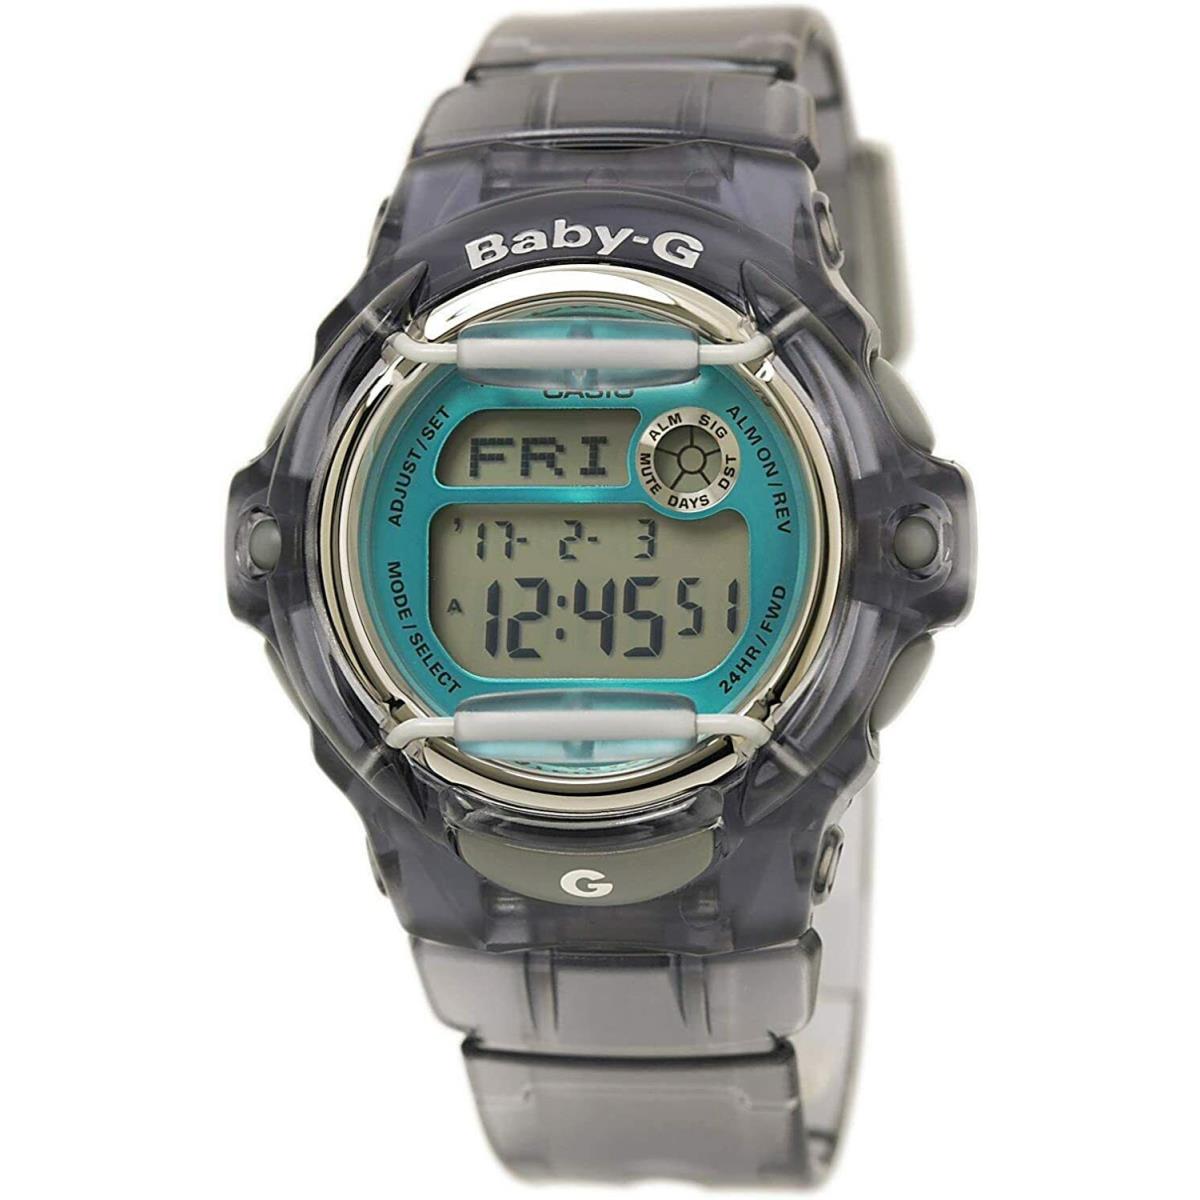 Casio Baby-g Shock BG169R-8B World Time Clear Gray Digital 200m Ladies Watch - Dial: Blue, Band: Gray, Manufacturer Band: Gray